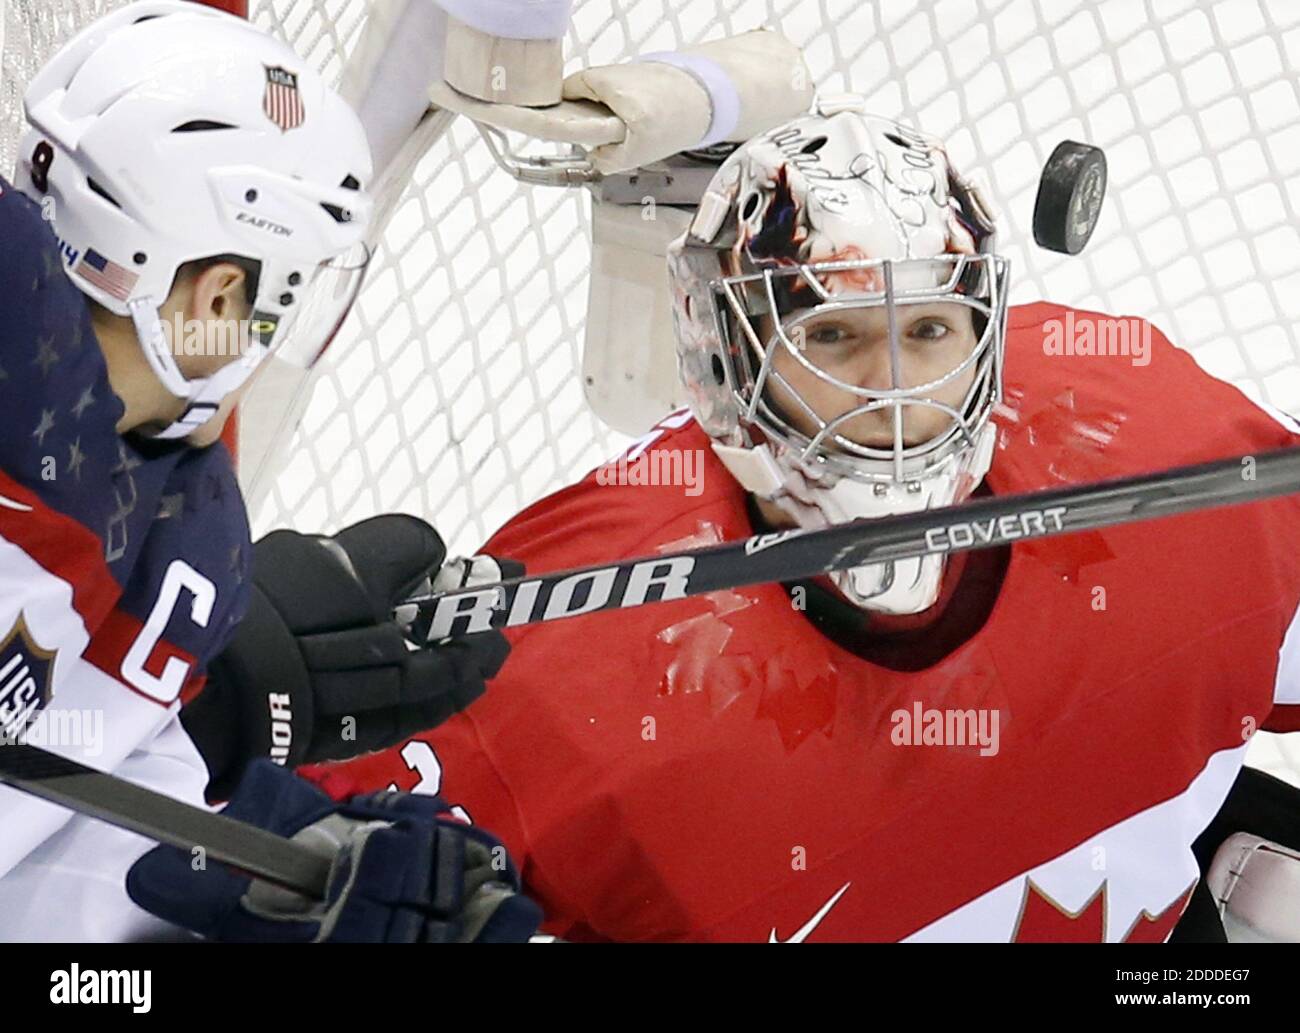 NO FILM, NO VIDEO, NO TV, NO DOCUMENTARY - Team USA captain Zach Parise (9) and team Canada goalie Carey Price (31) in the first period in the men's hockey semifinal at Bolshoy Ice Dome during the Winter Olympics in Sochi, Russia, Friday, February 21, 2014. Canada beat USA 1-0. Photo by Carlos Gonzalez/Minneapolis Star Tribune/MCT/ABACAPRESS.COM Stock Photo